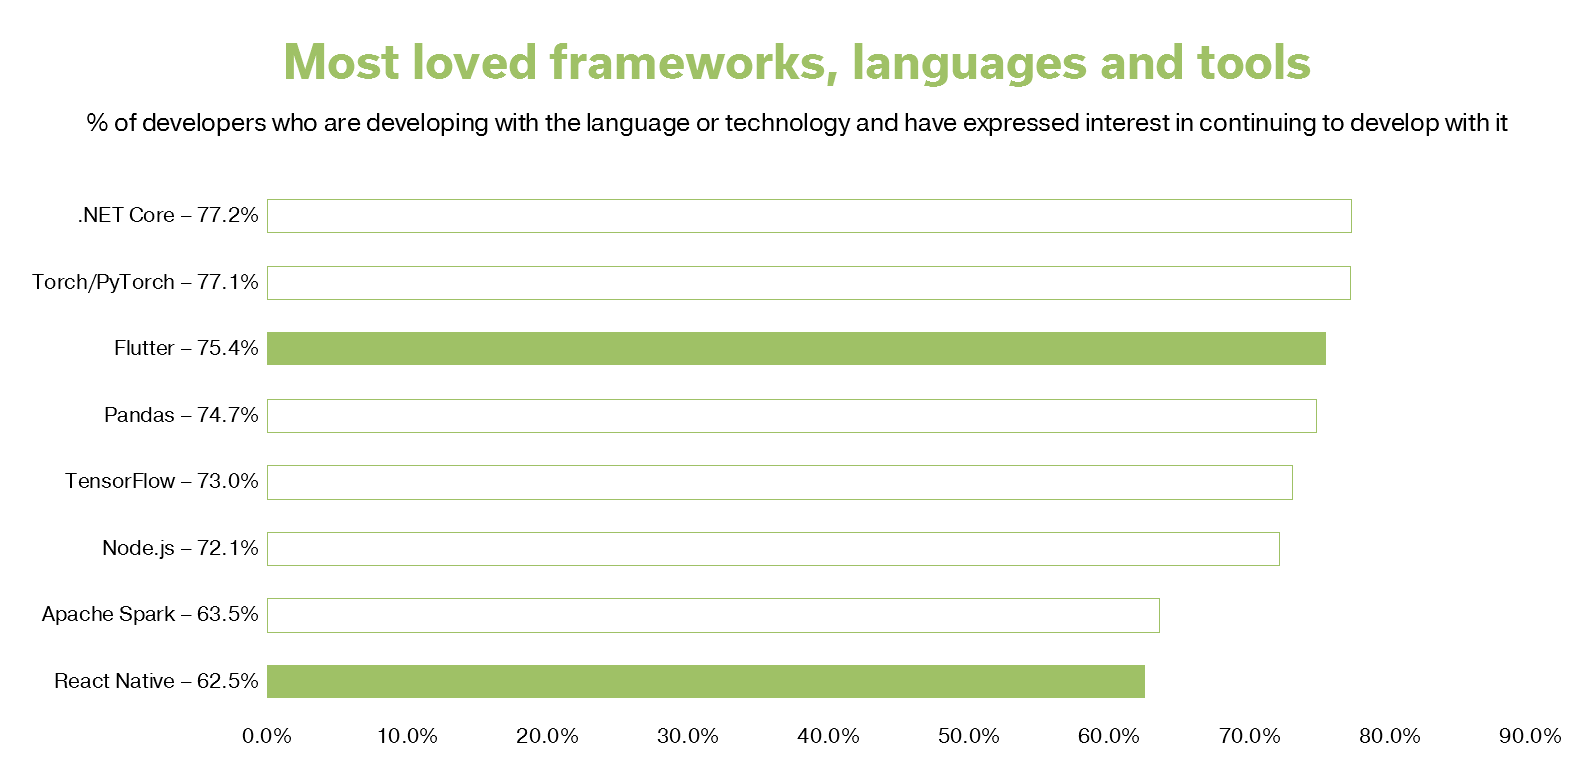 Horizontal bar chart titled Most loved frameworks, languages and tools, the description of chart reads
Percentage of developers who are developing with the language or technology and have expressed interest in continuing to develop with it.